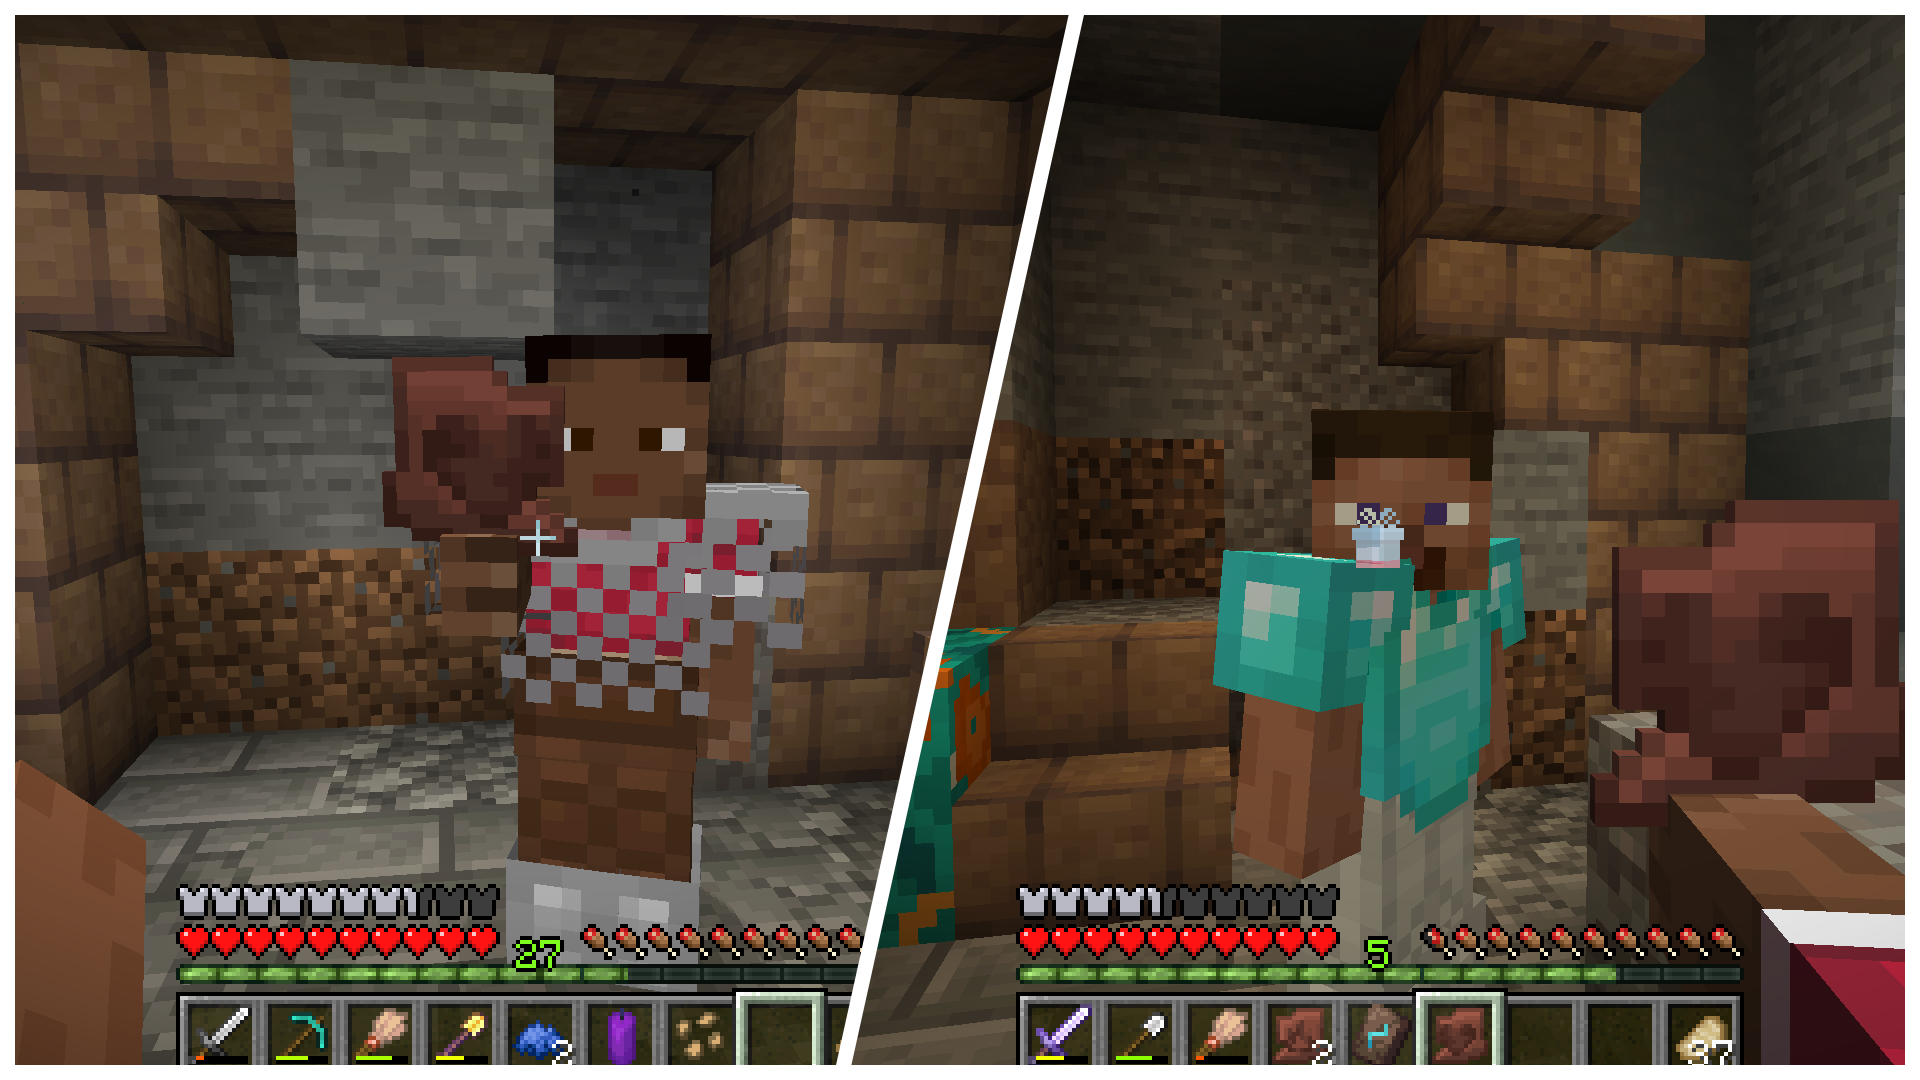 Zuri, a Minecraft character, sharing a Heart Pottery Sherd with Steve, a Minecraft character, from both first and third person